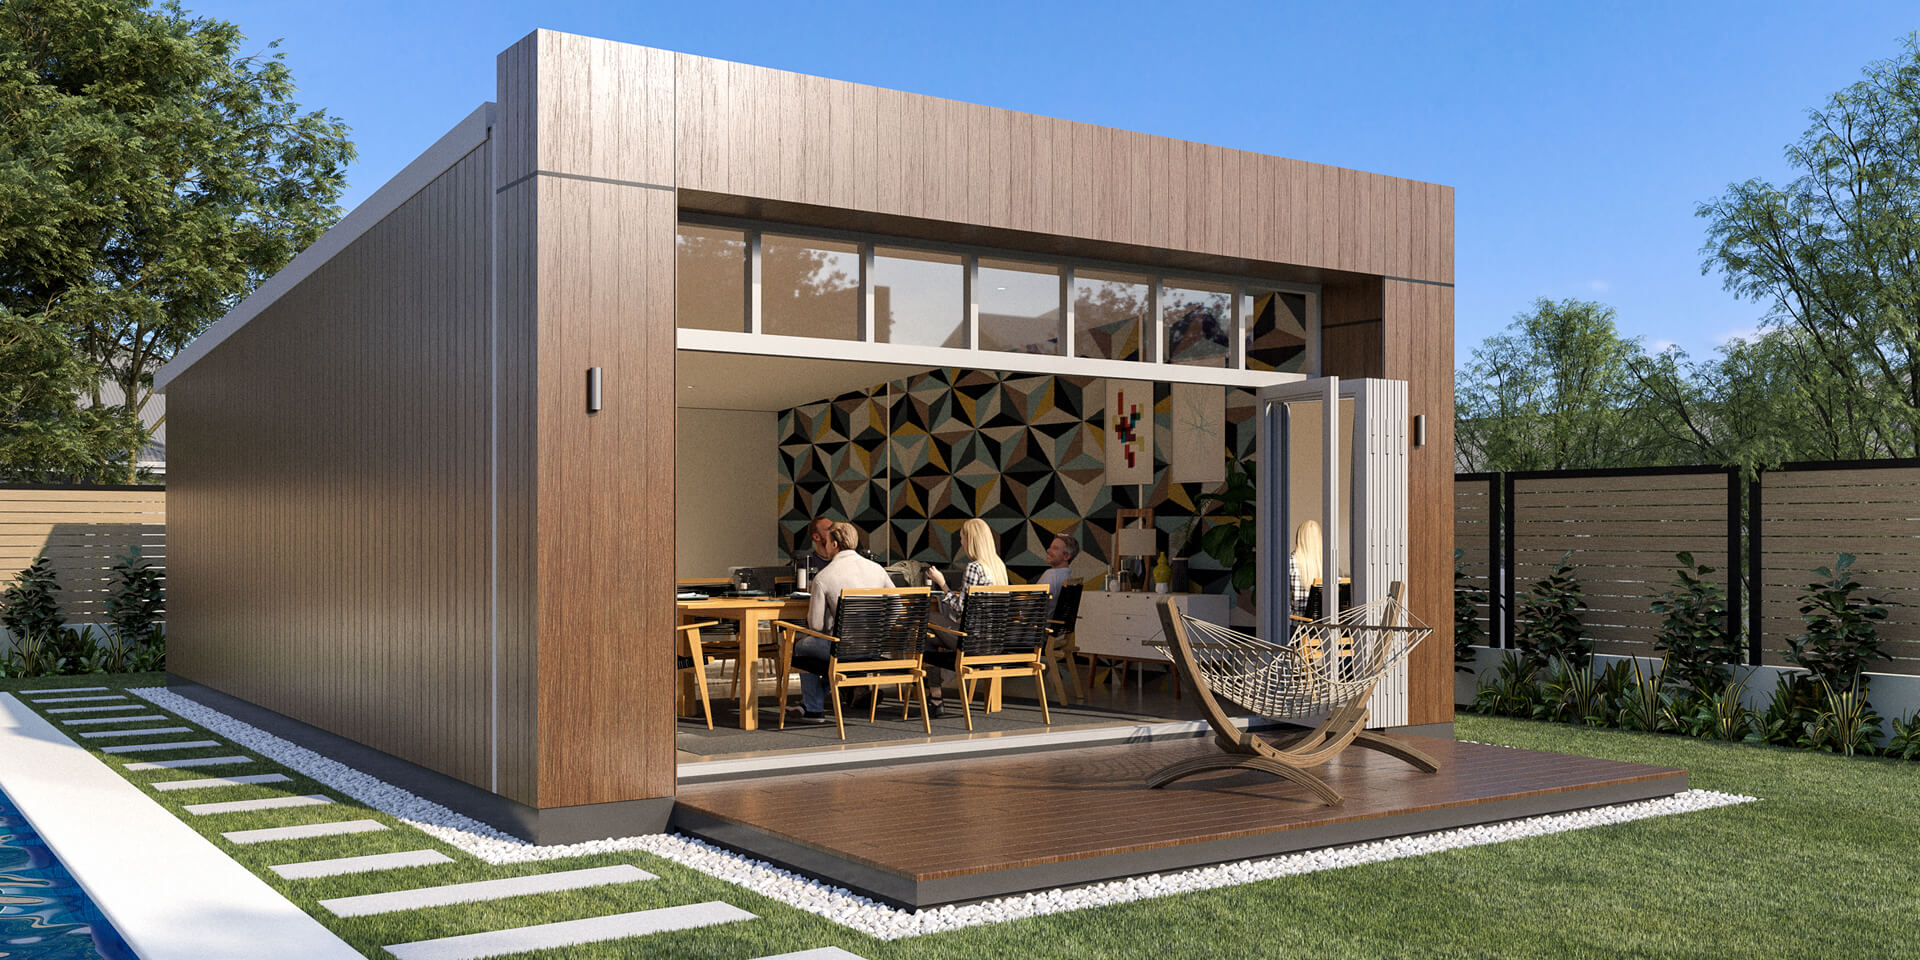 The Bisque hybrid home by mygen homes